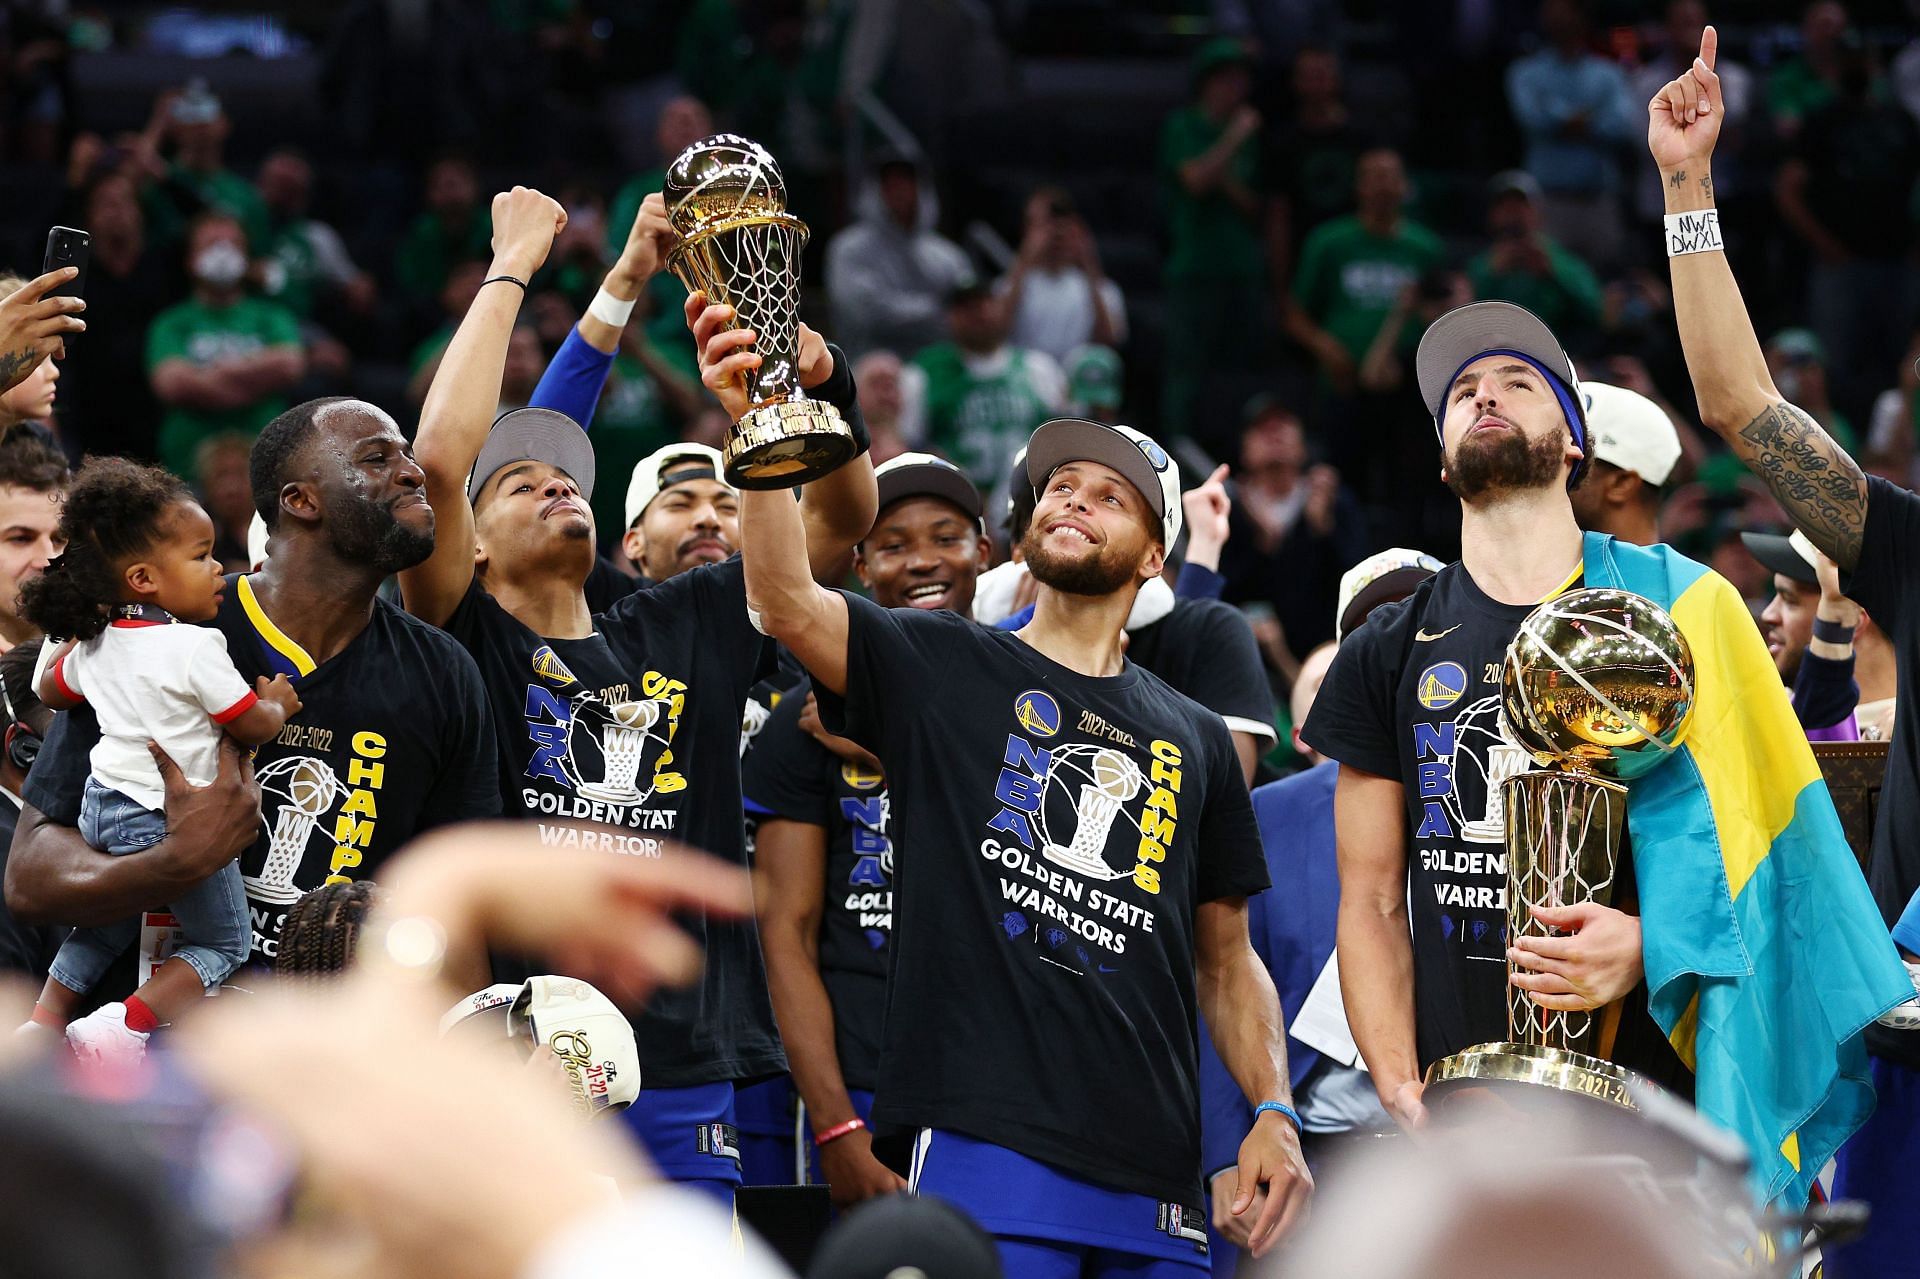 Steph Curry of the Golden State Warriors raises the Finals MVP trophy after winning the 2022 NBA Finals